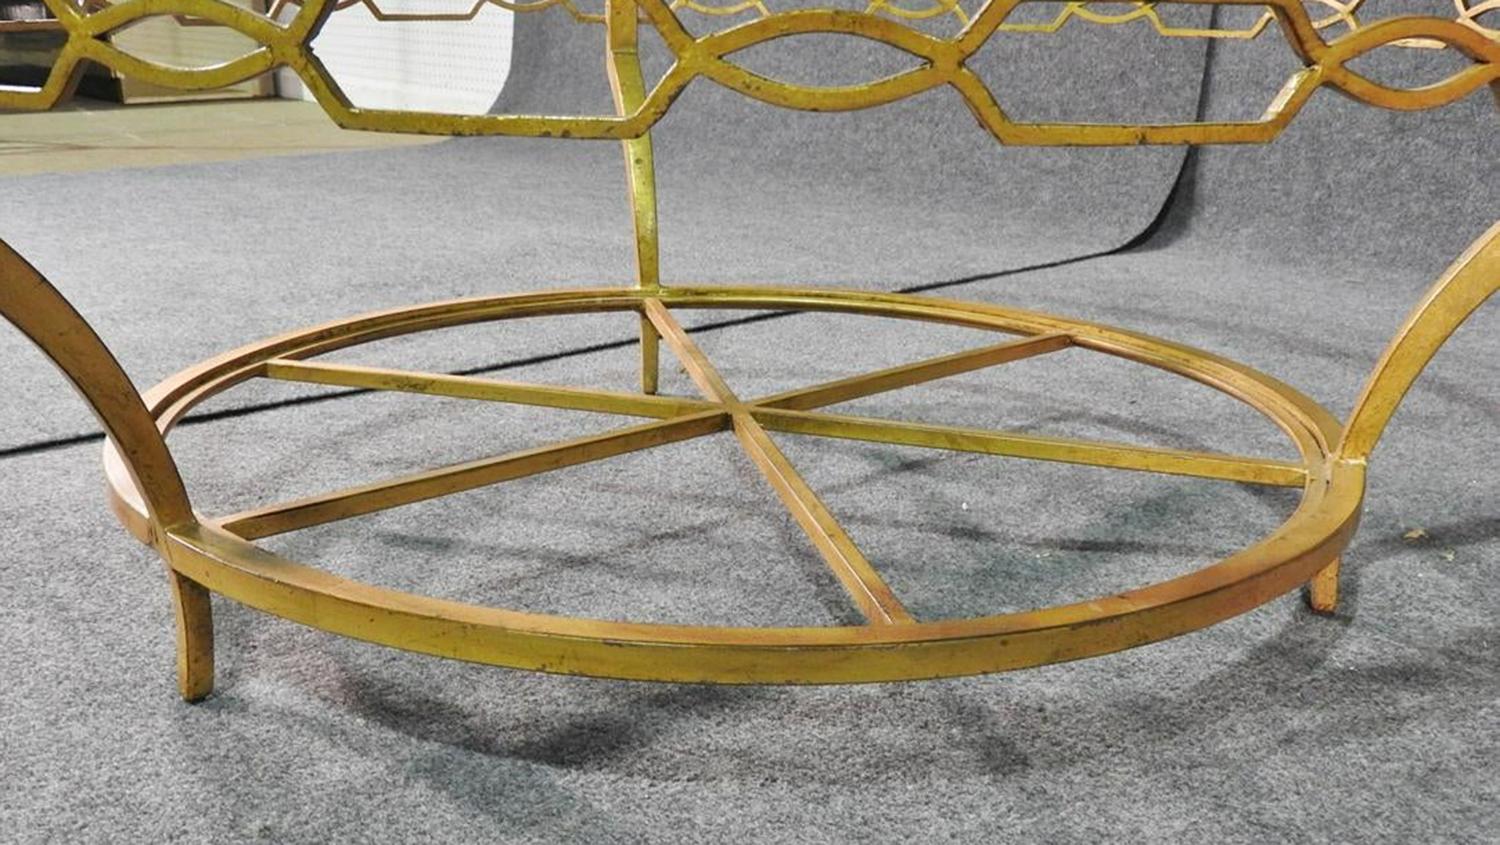 This is a simple and sophisticated coffee table. The thick glass top adds lightness to a room and the gold base with genuine gold leaf gilding adds glamour. The table measures 16